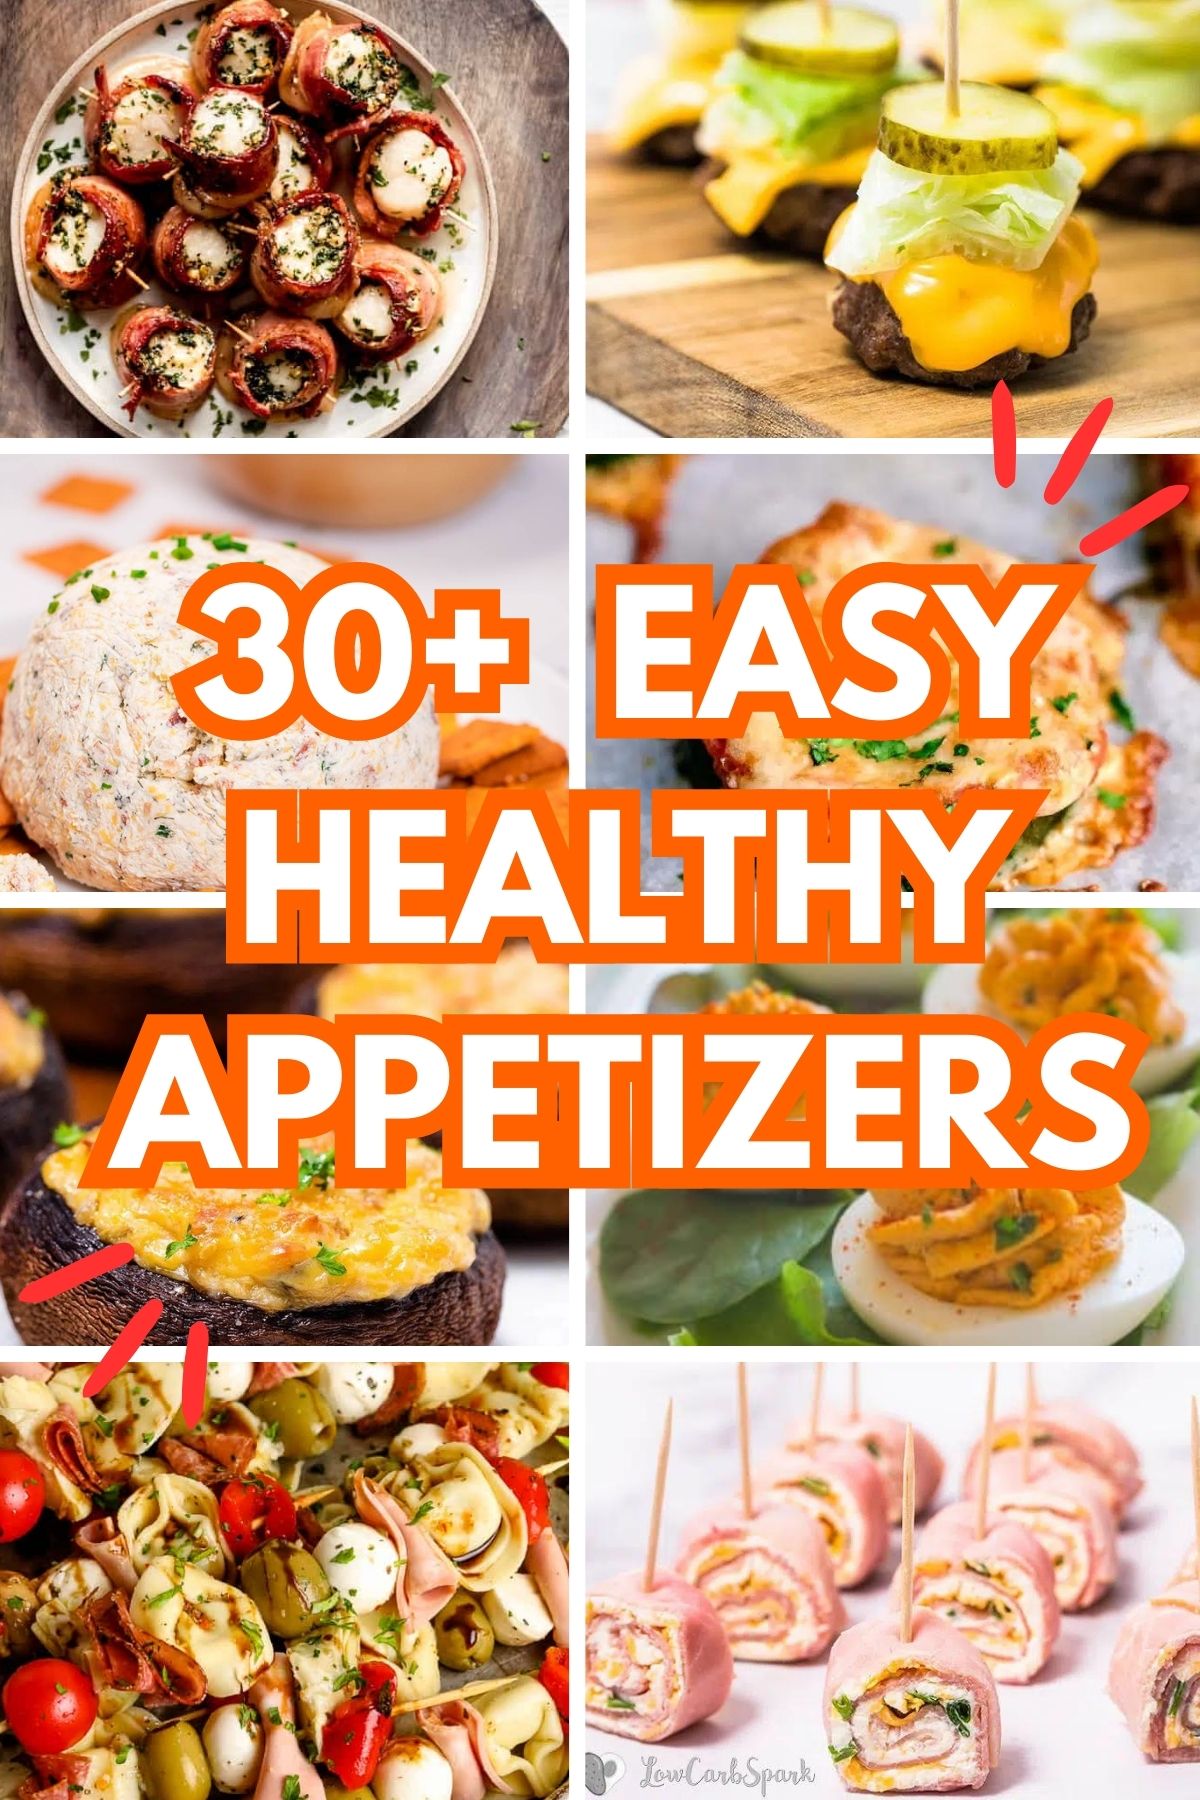 30+ EASY HEALTHY aPPETIZERS